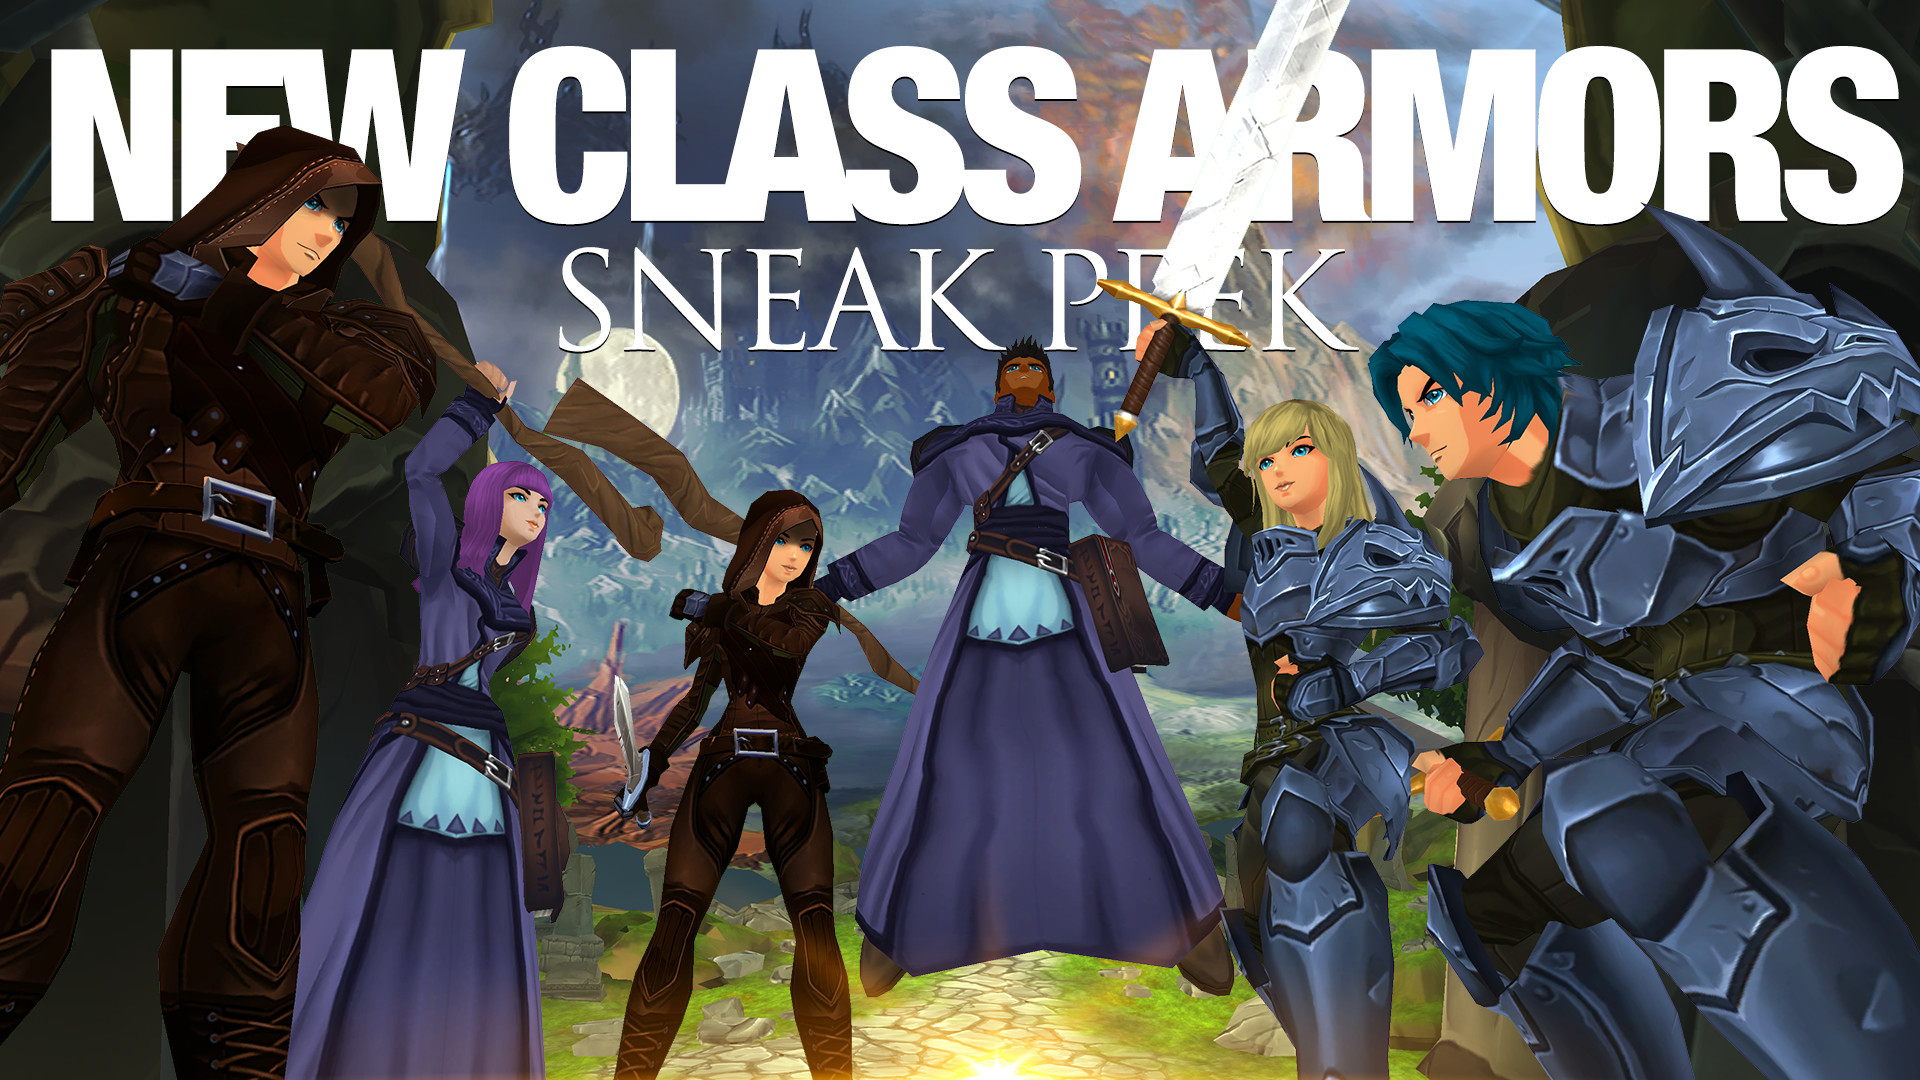 New this class this